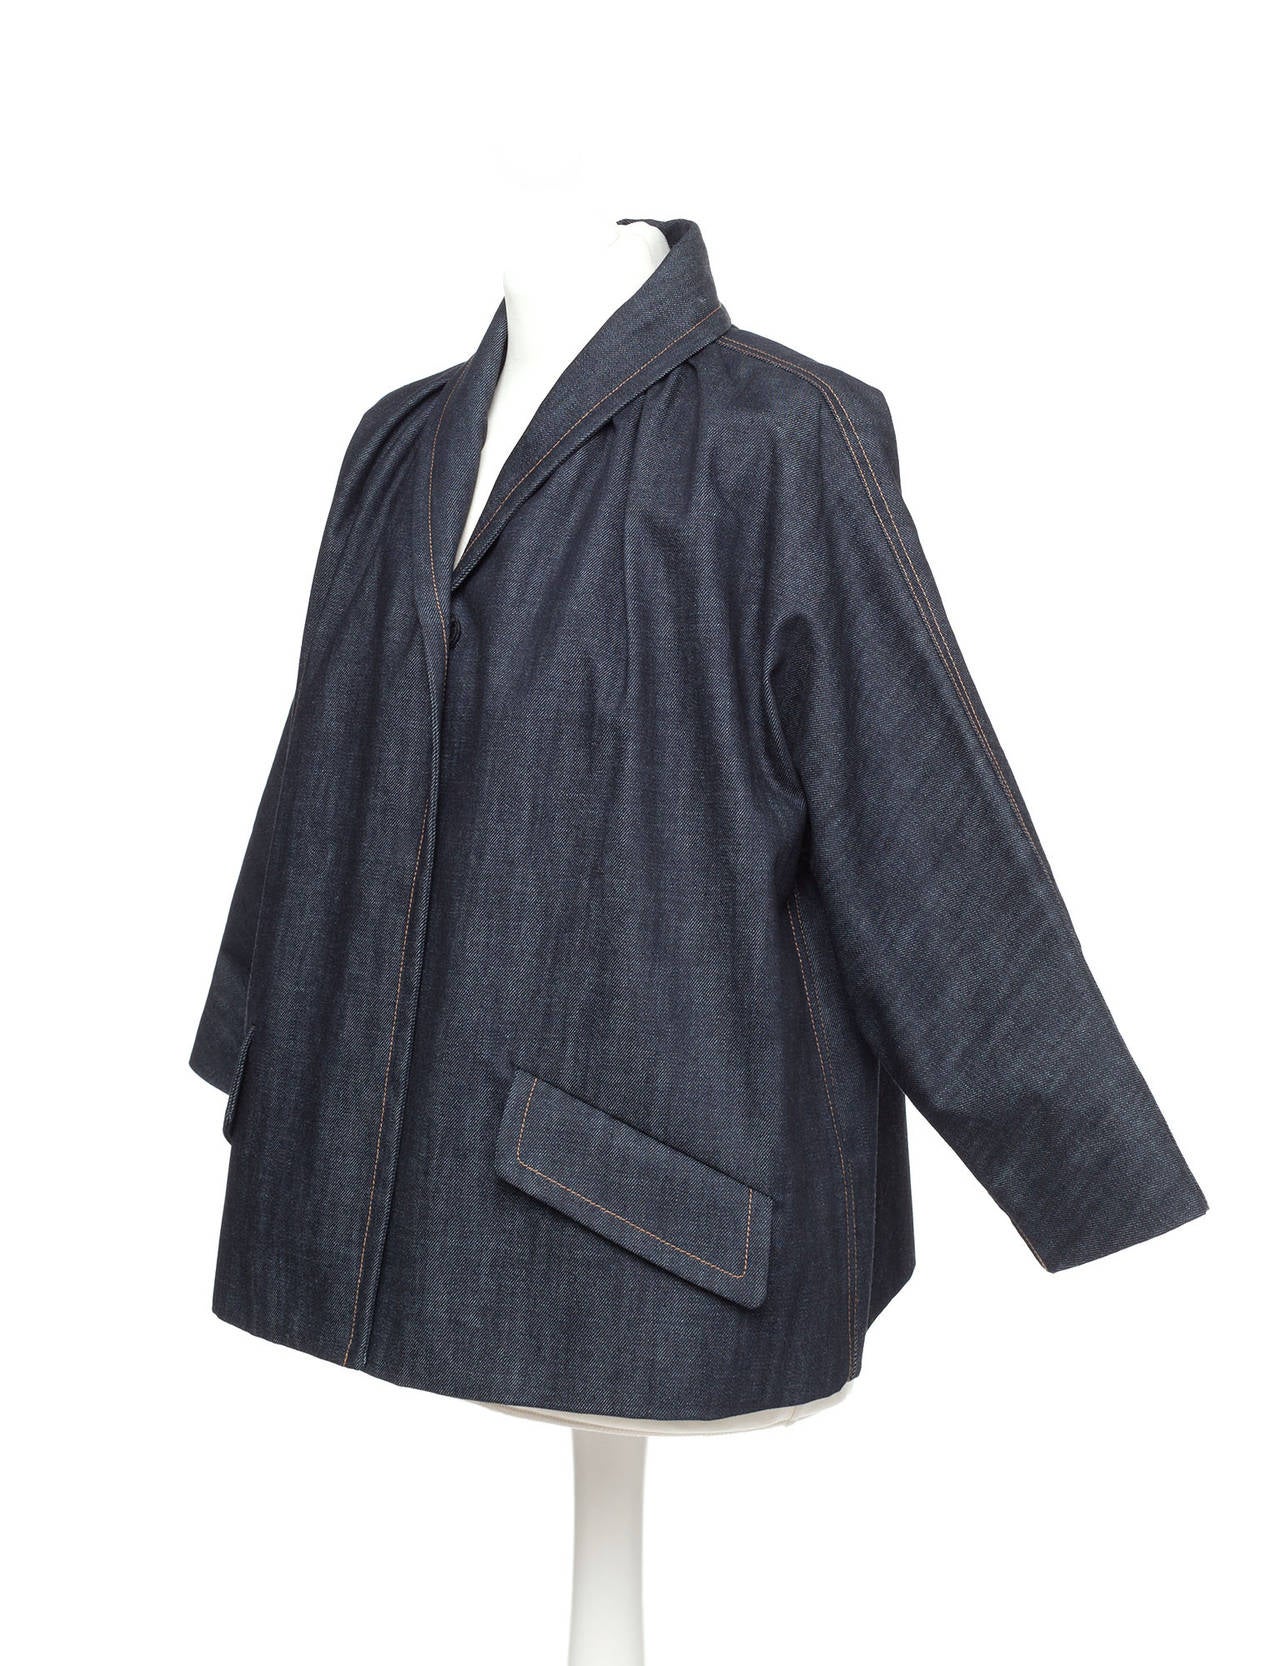 Jacket is cut aline shape with dolman sleeves, oversized snap buttons and shawl collar, 3/4 sleeves. Vintage Miu Miu denim jacket from early 2000's.